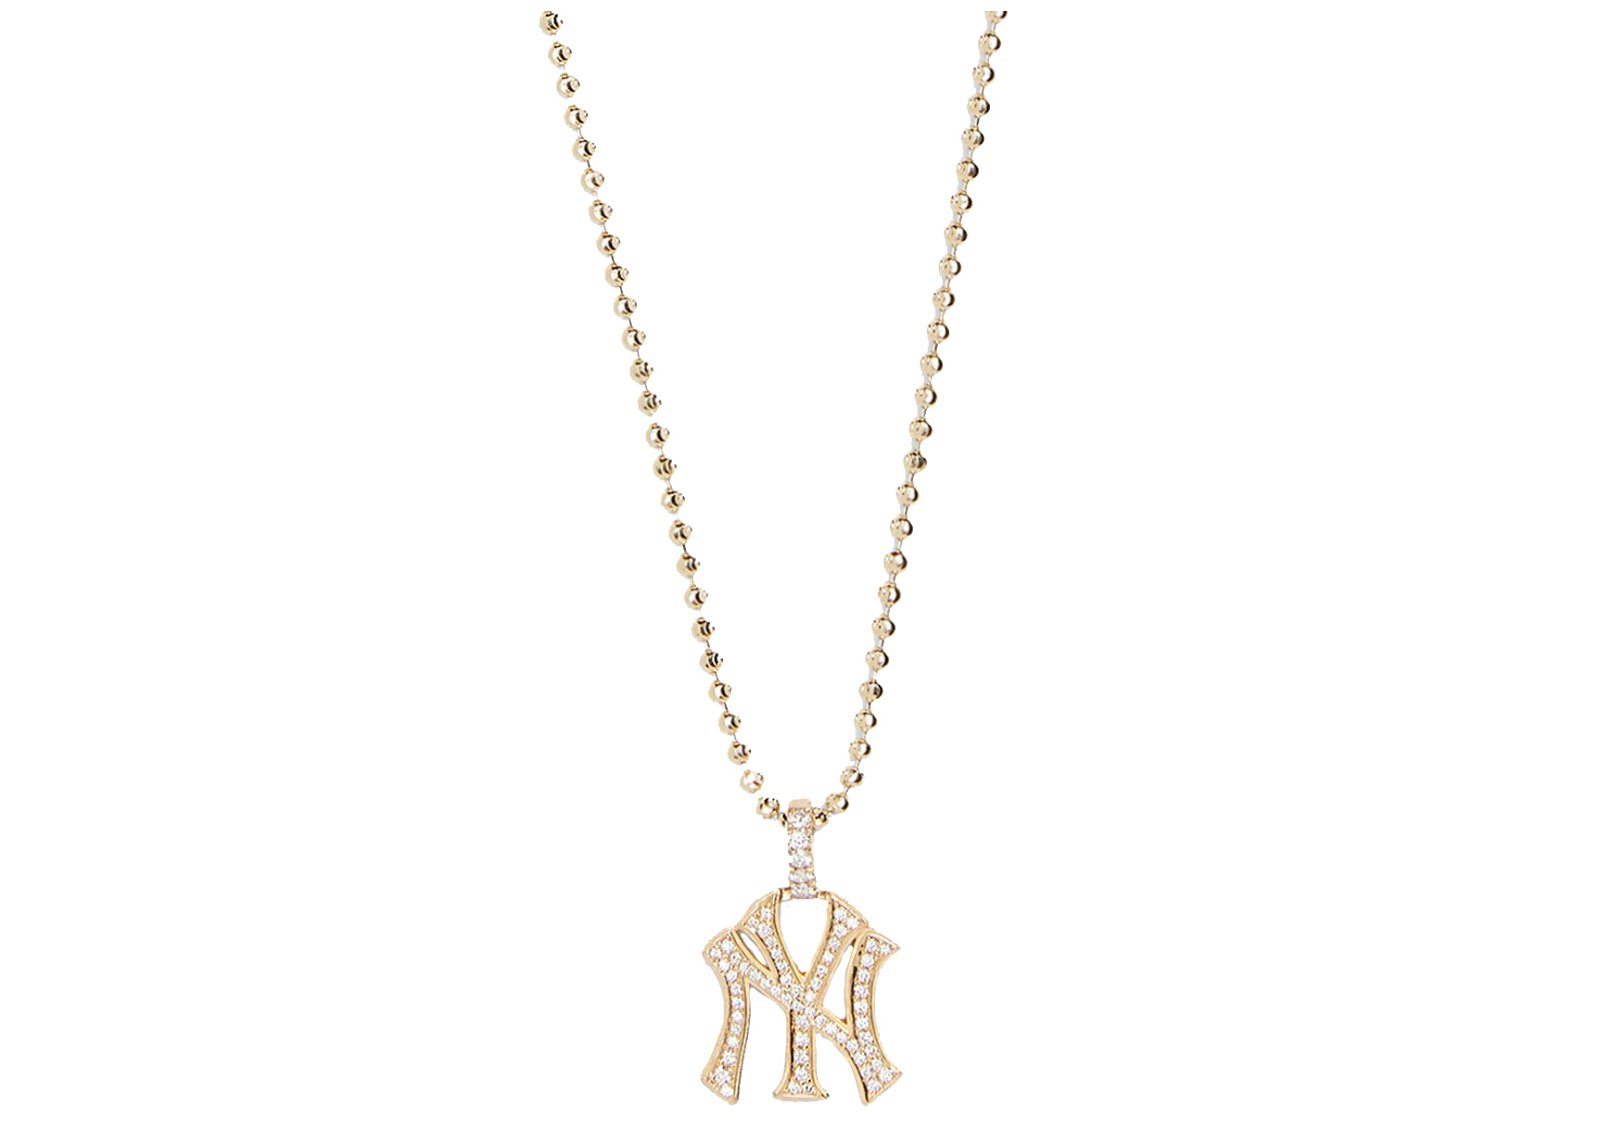 Kith Greg Yuna for New York Yankees Pendant Necklace Gold sneakers